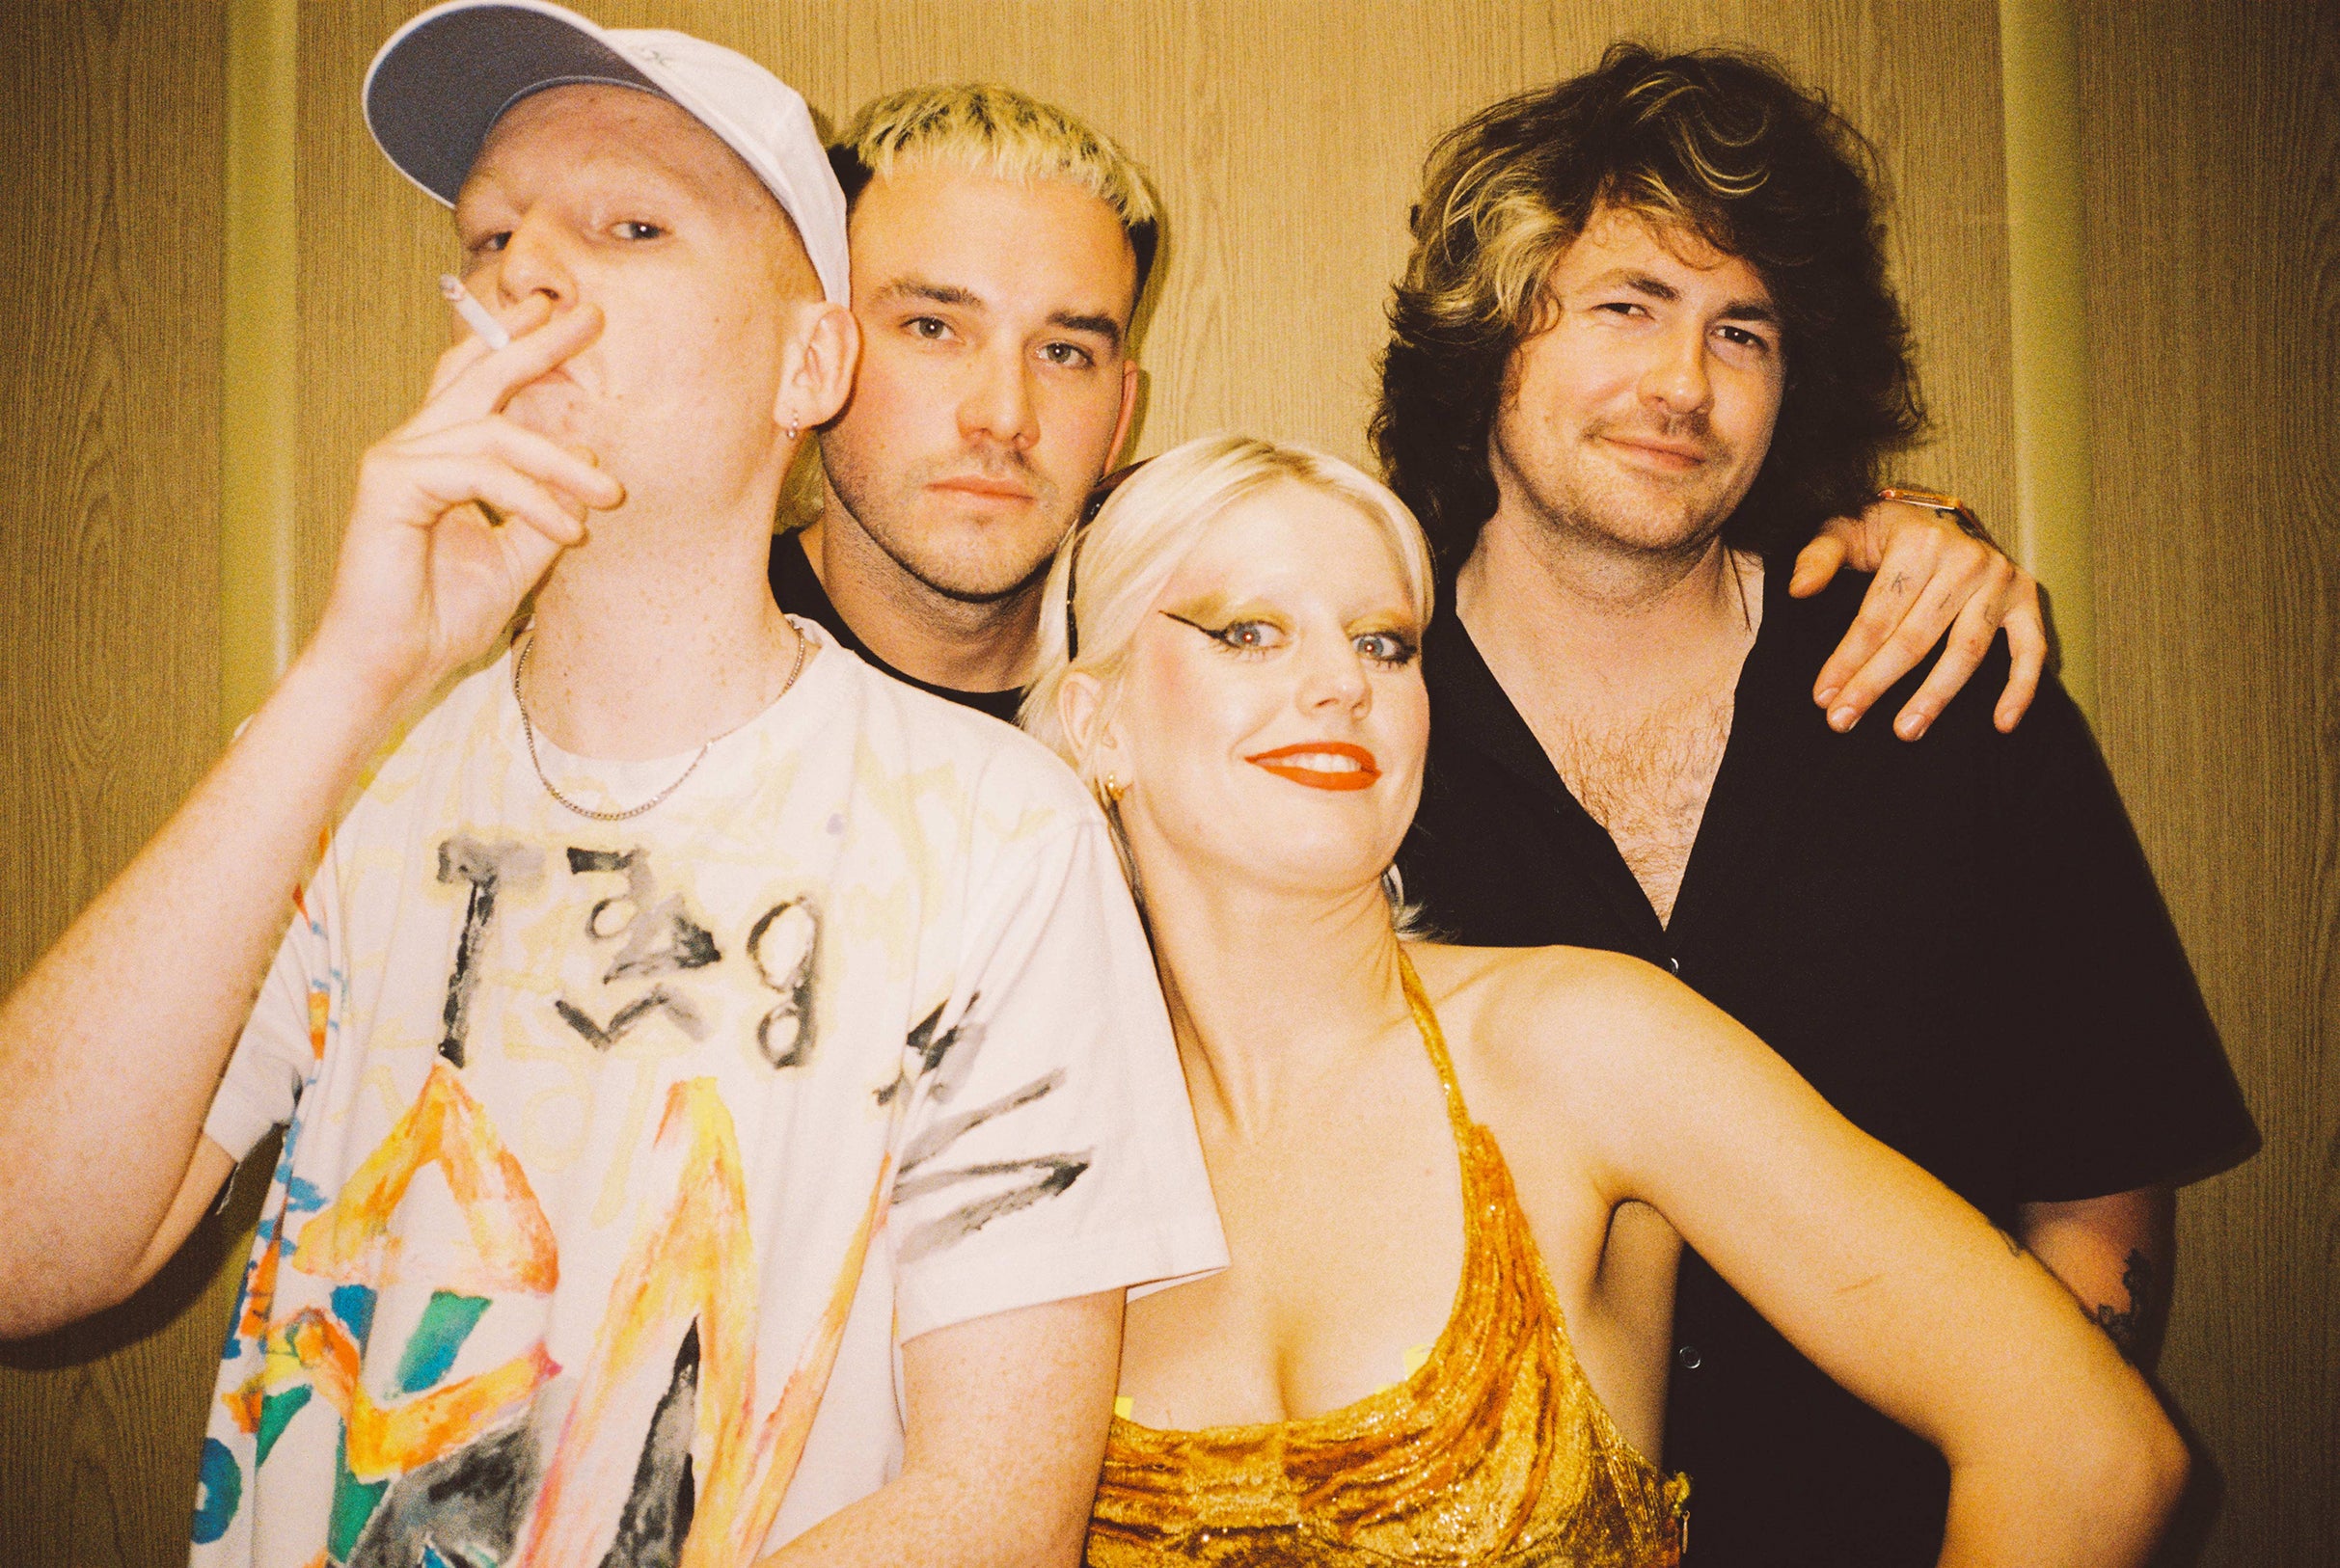 Amyl and the Sniffers free presale c0de